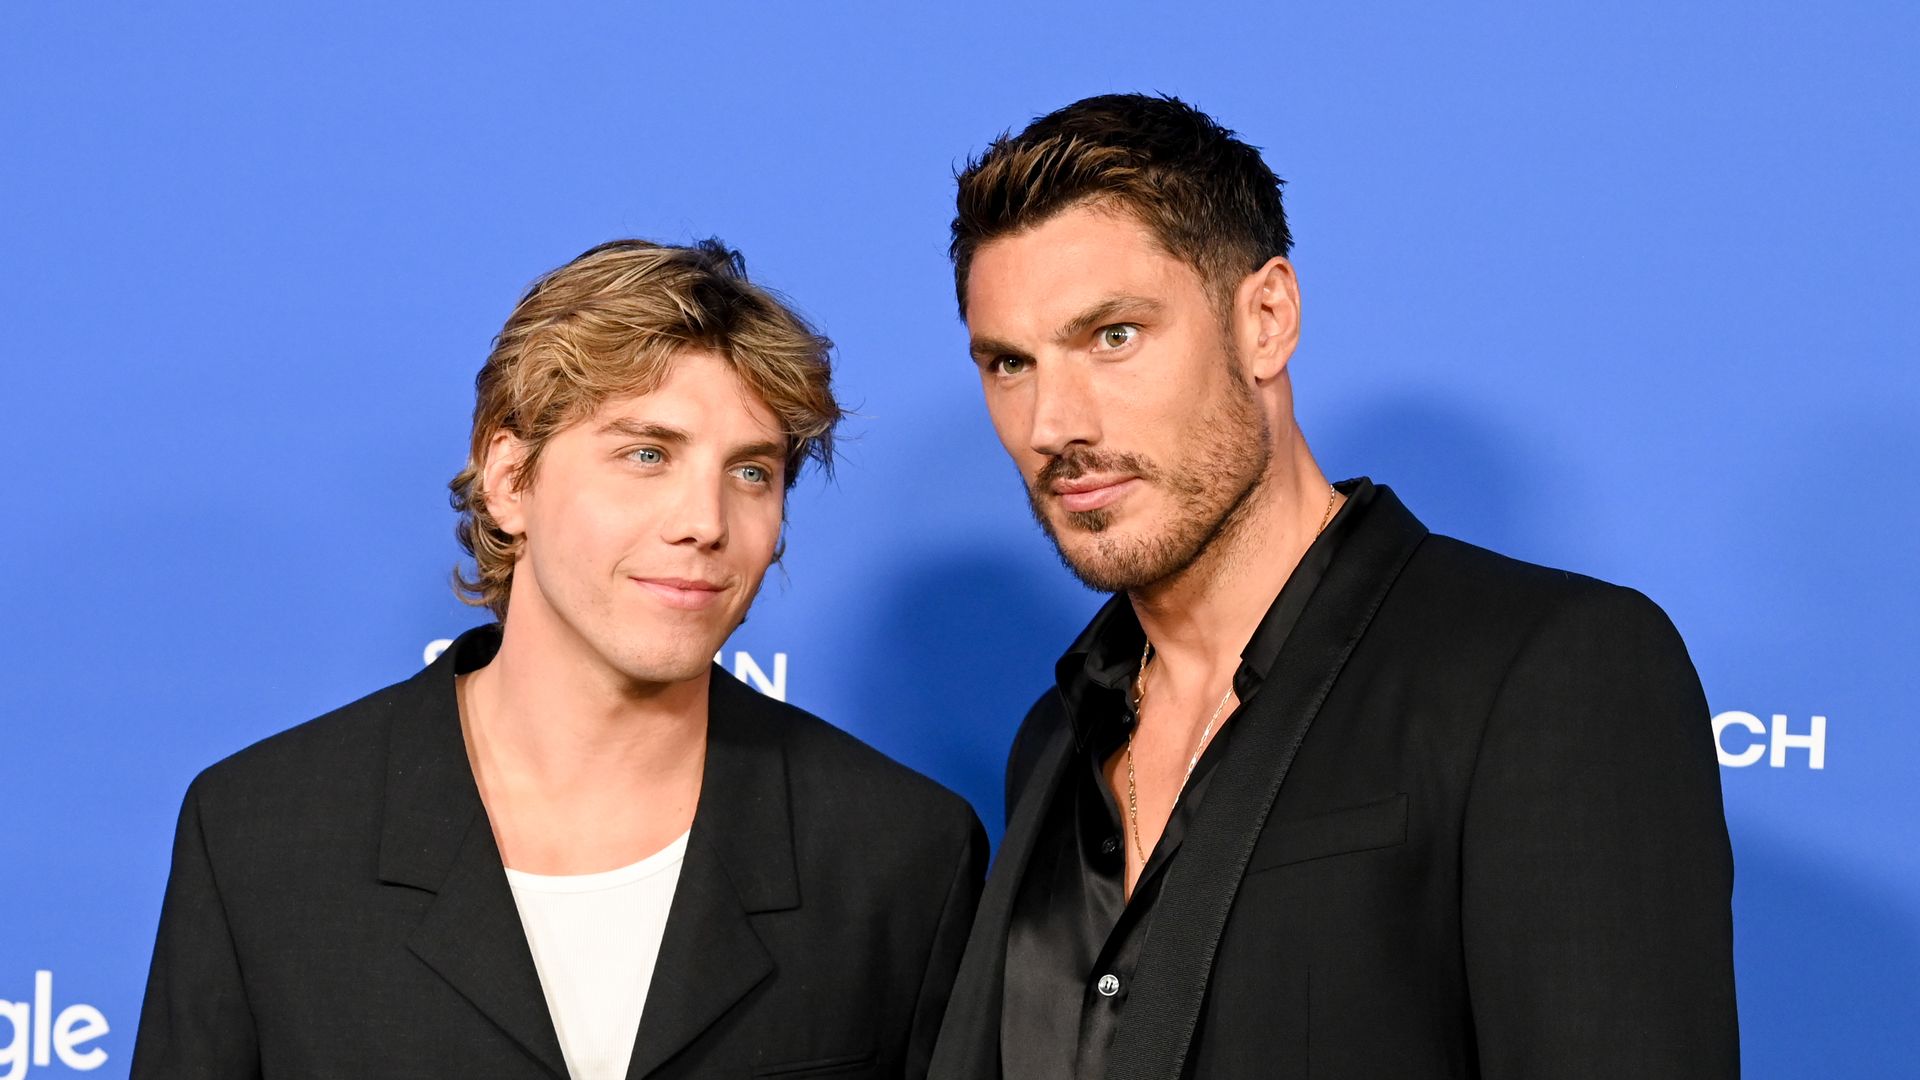 Lukas Gage and Chris Appleton at the Fashion Trust U.S. Awards held at Goya Studios on March 21, 2023